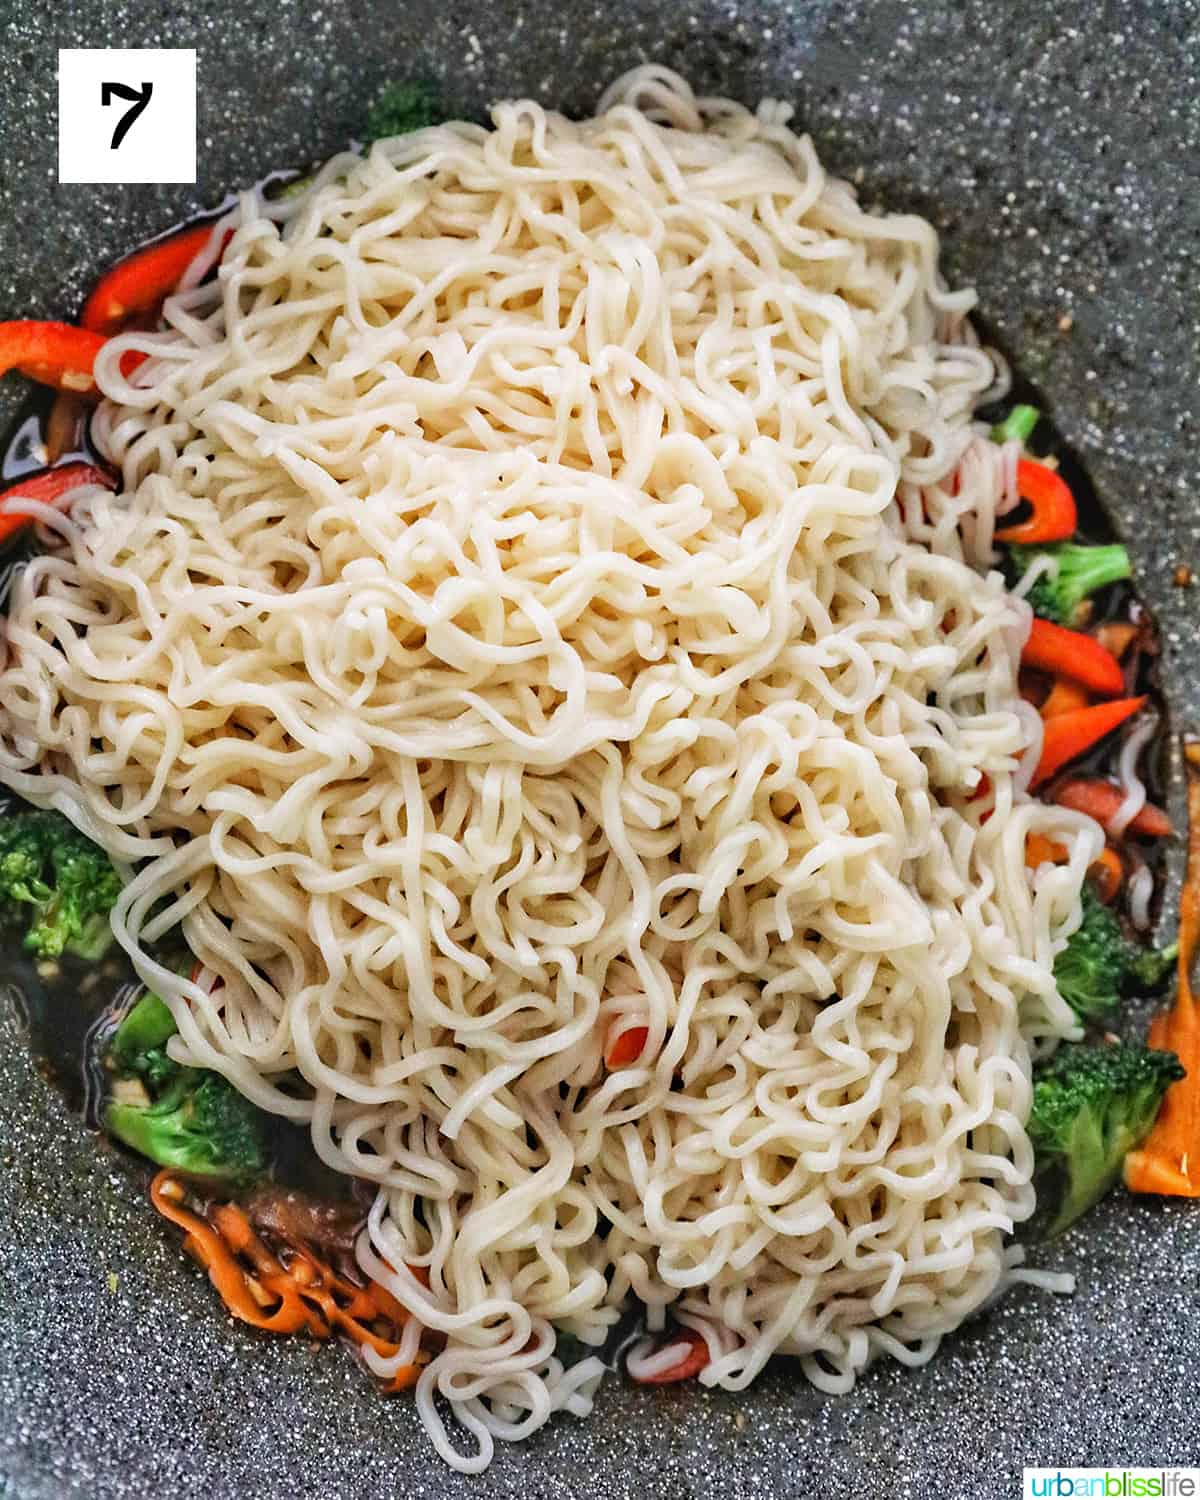 adding noodles to carrots, broccoli, bell peppers in a wok.